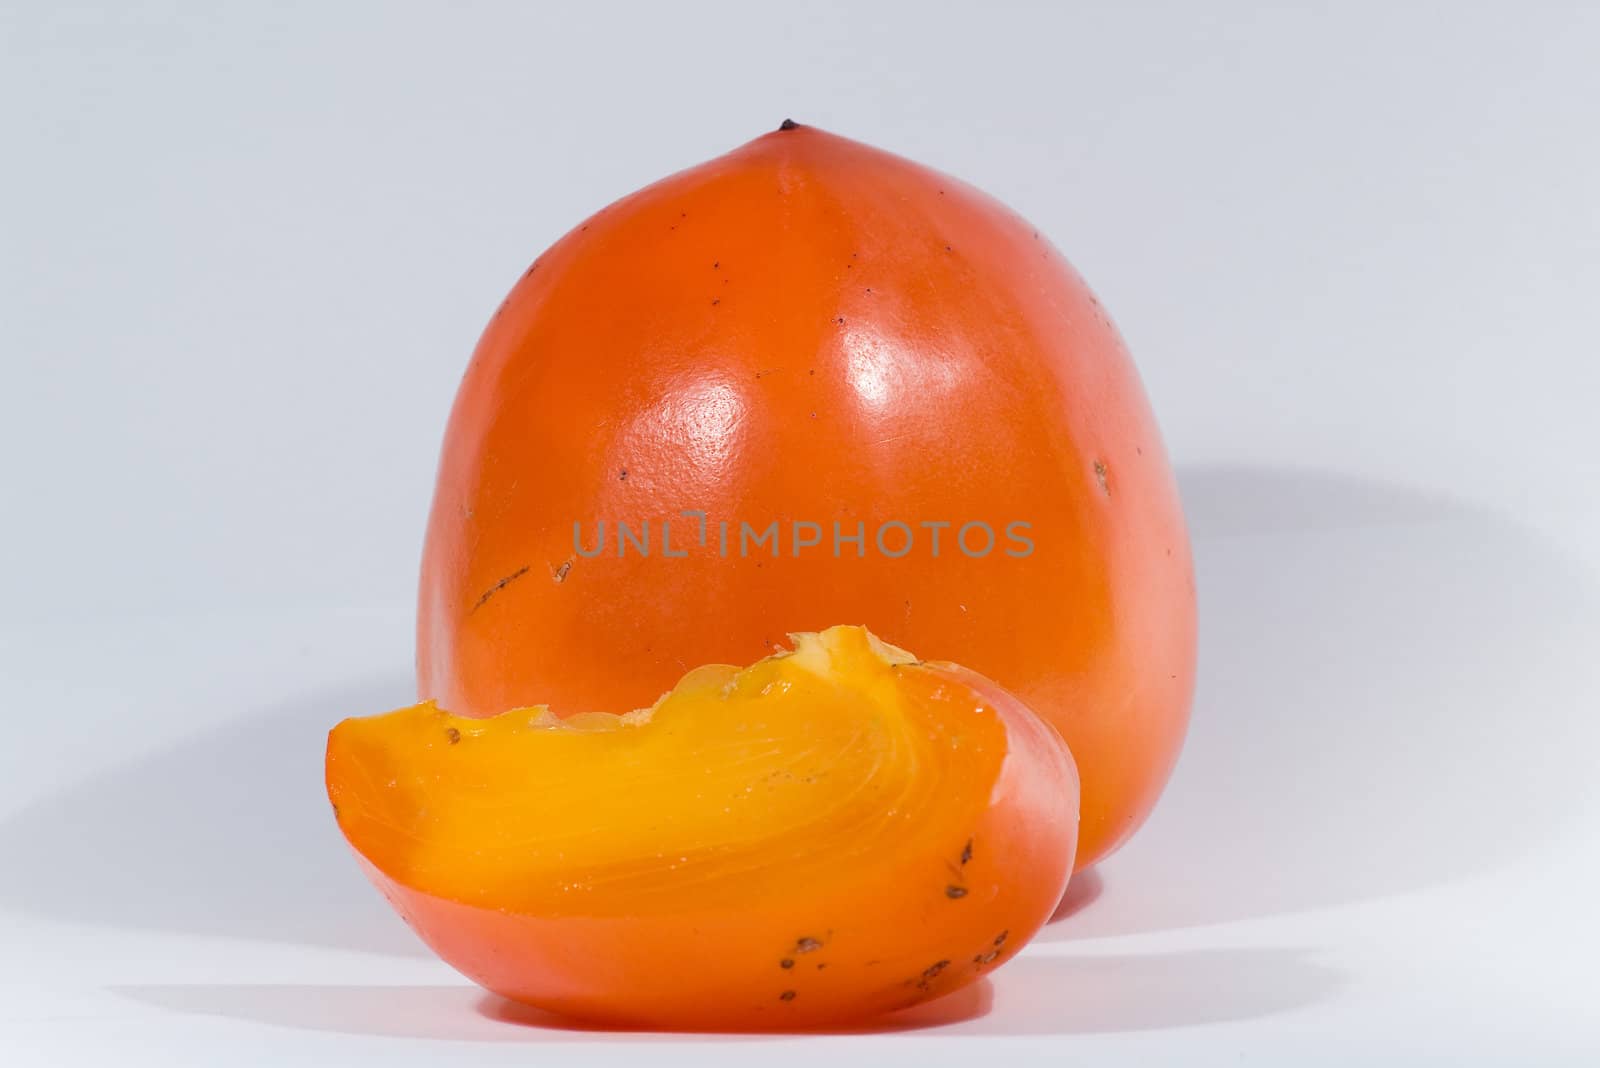 Persimmon by dolnikow